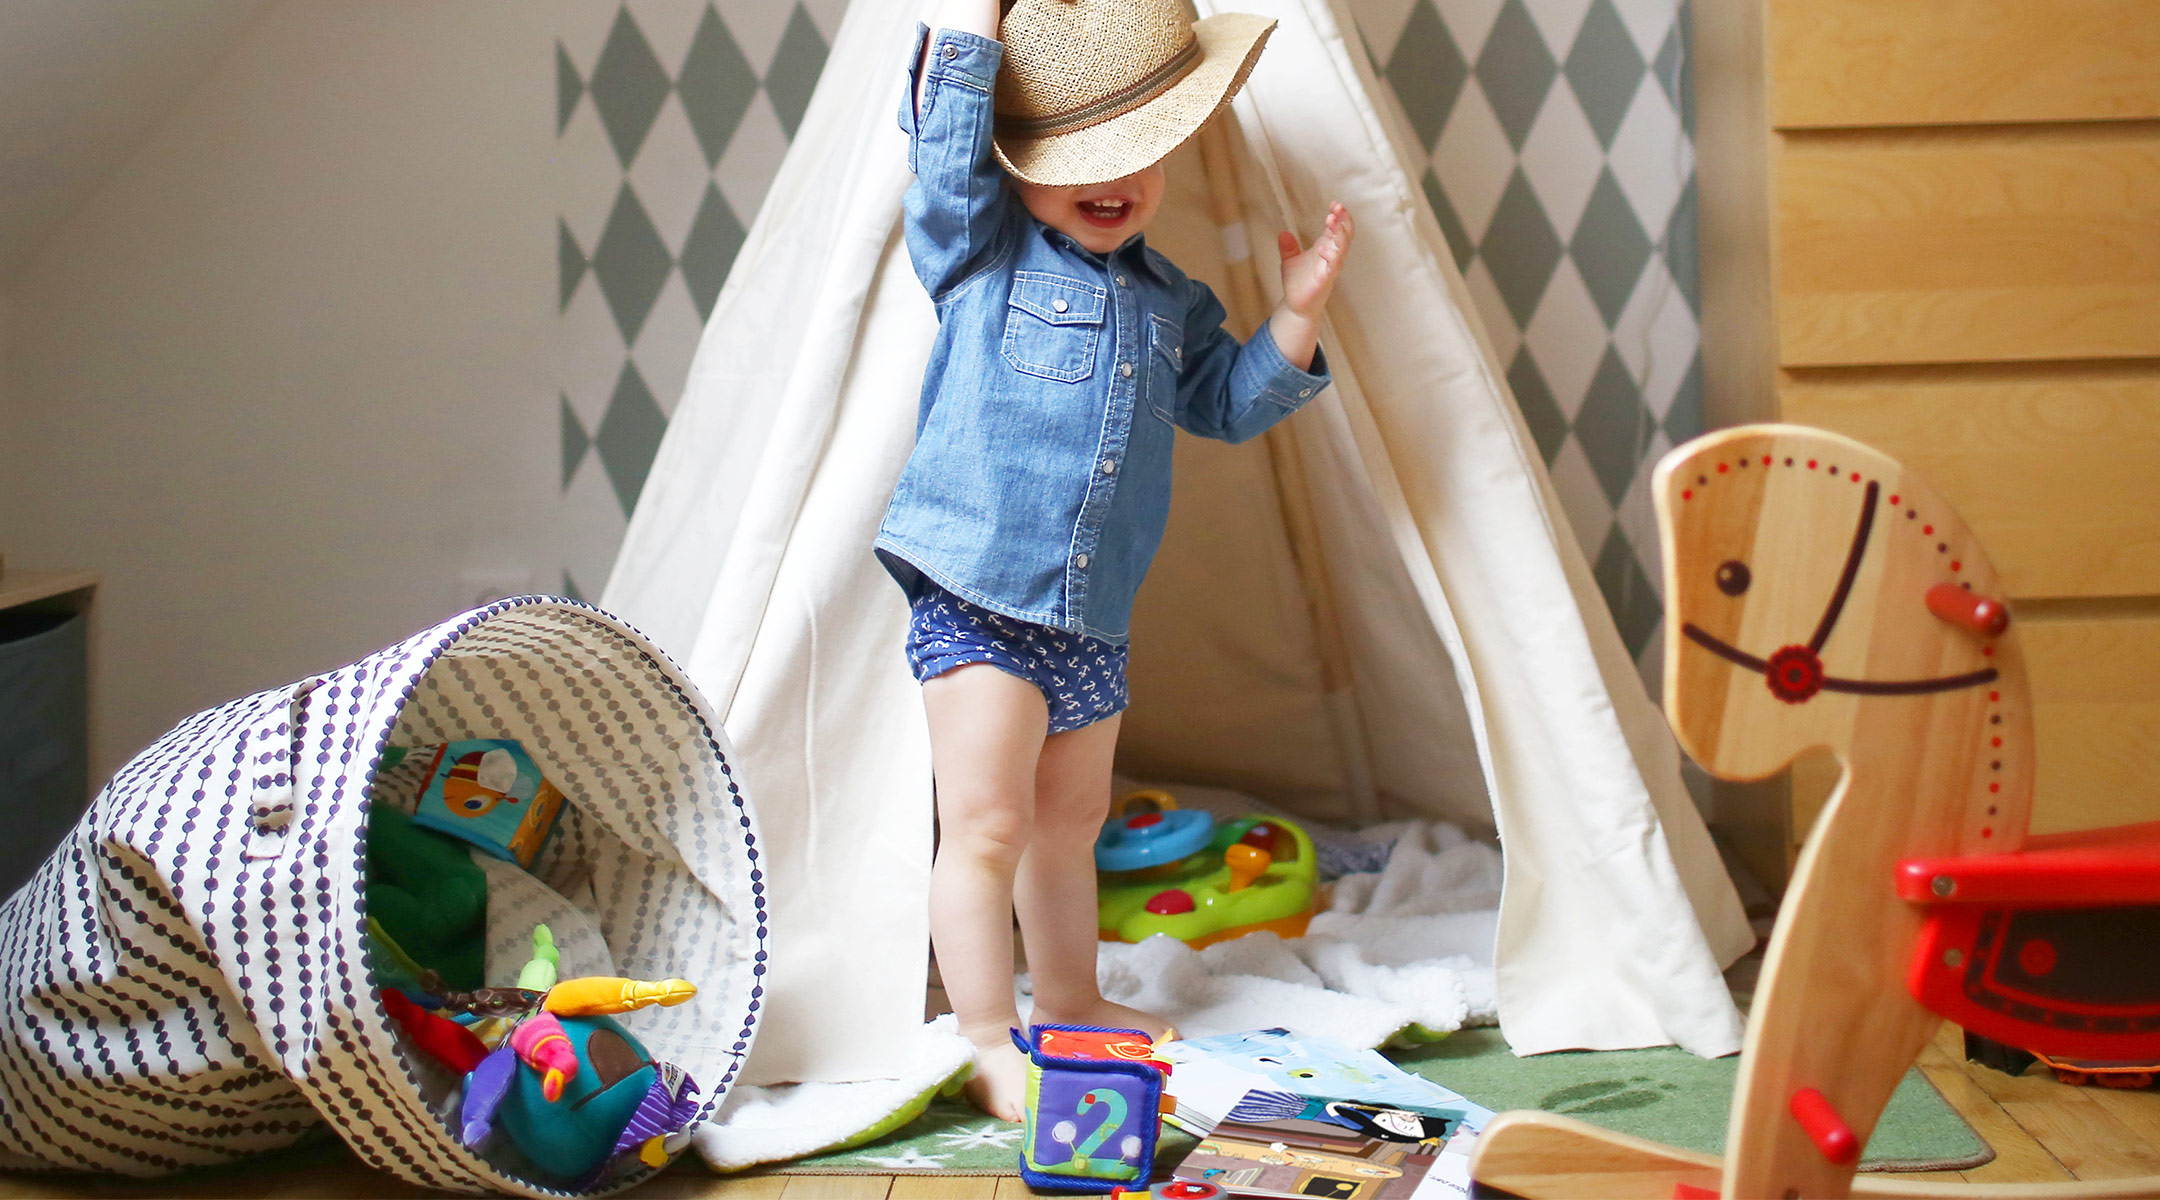 toddler playing in his room with toys and teepee